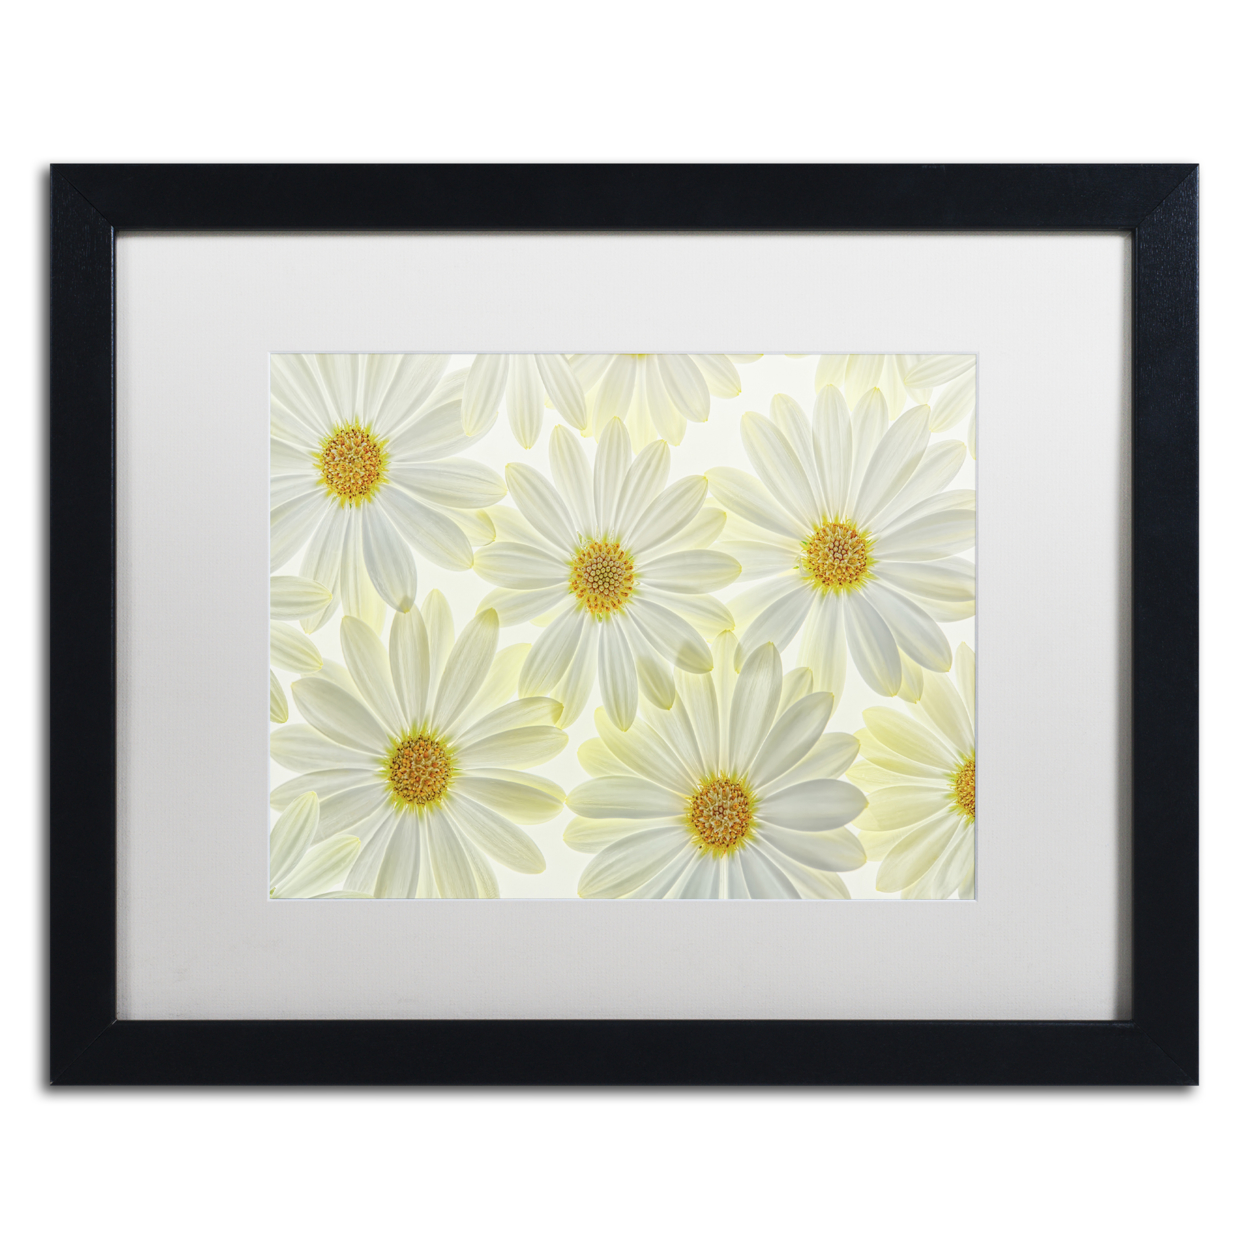 Cora Niele 'Daisy Flowers' Black Wooden Framed Art 18 X 22 Inches